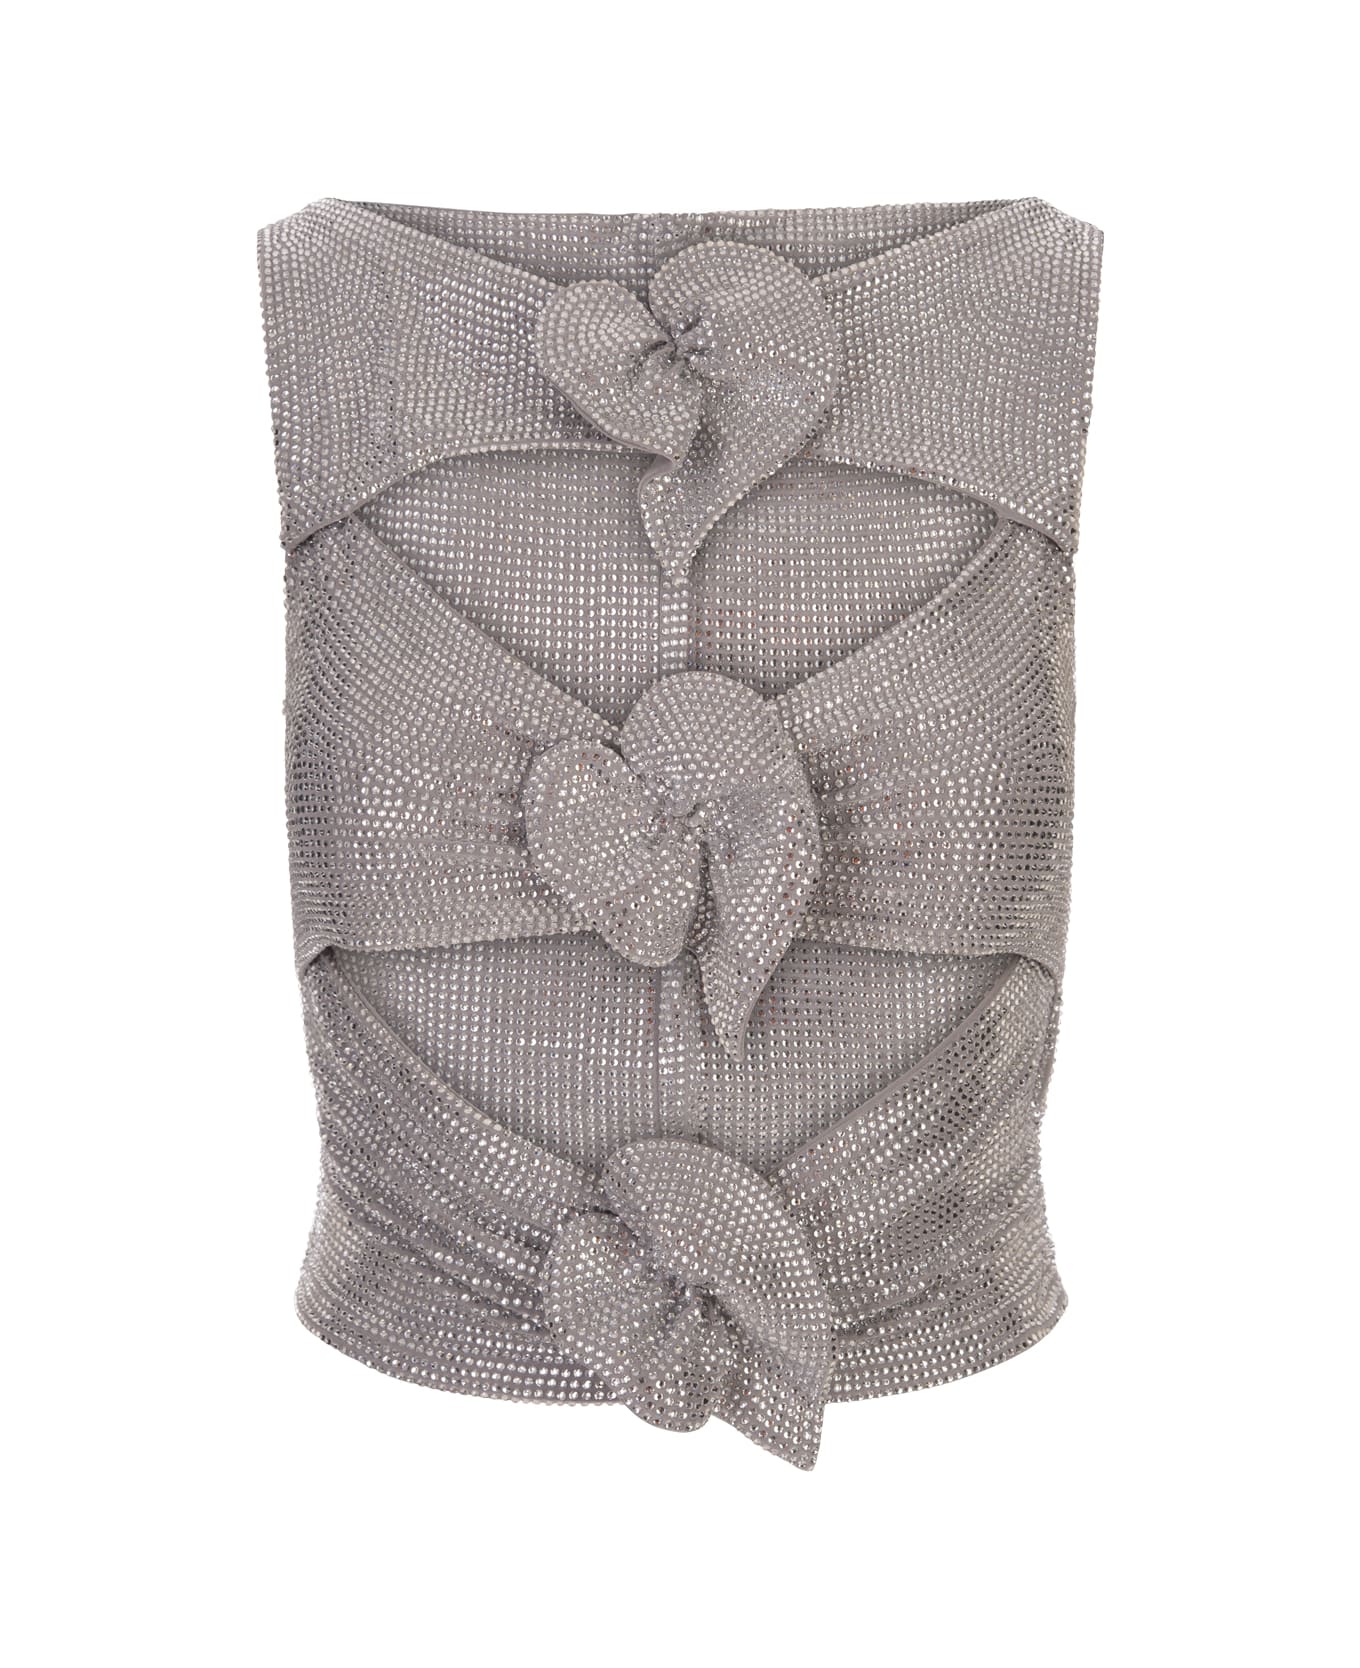 Giuseppe di Morabito Silver Top With Crystals And Applied Flowers - Grey トップス